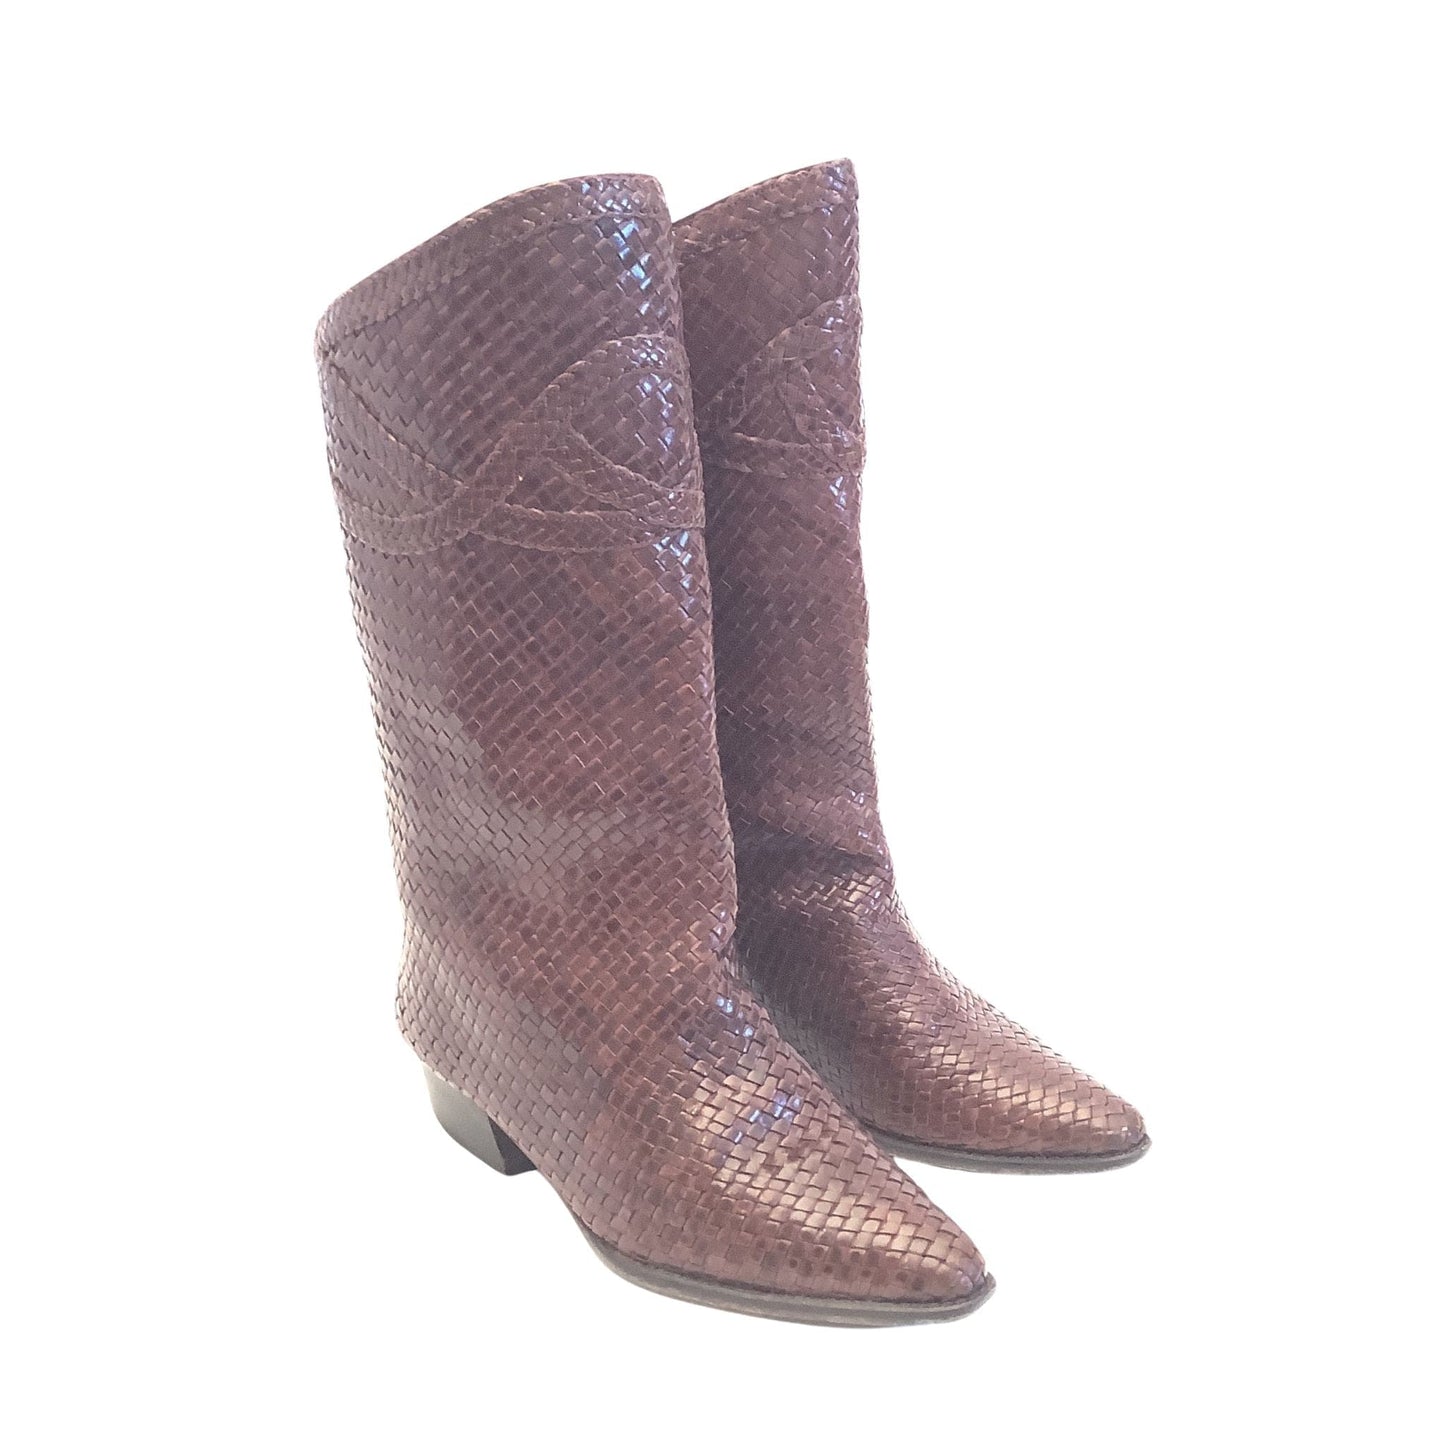 Vintage Woven Leather Boots 8 / Brown / Vintage 1990s